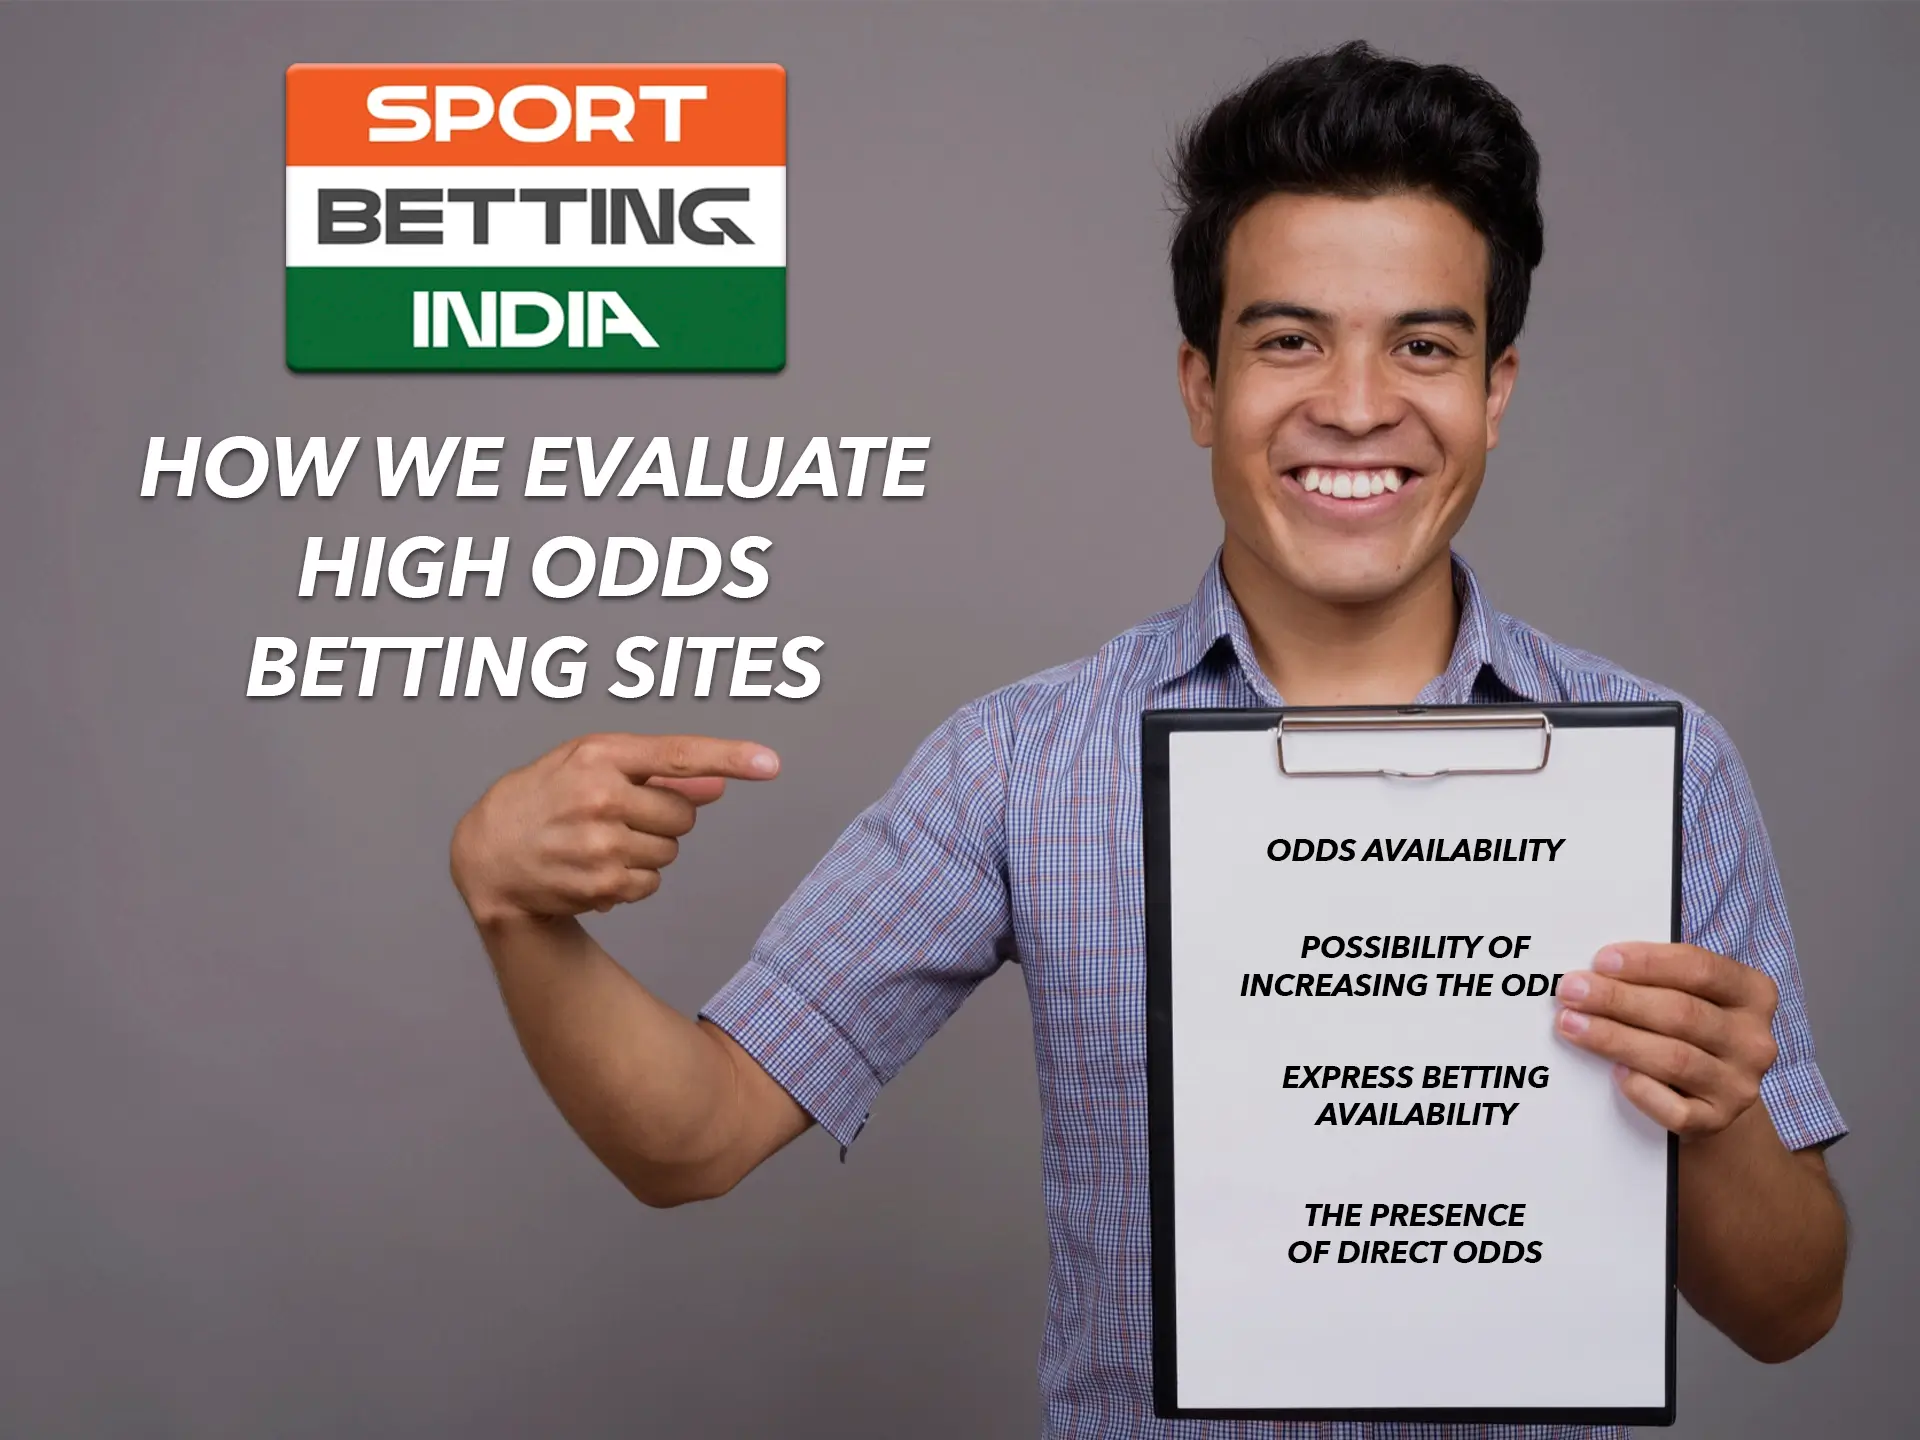 Use the experience gained from this article to identify a bookmaker that is favourable to you.